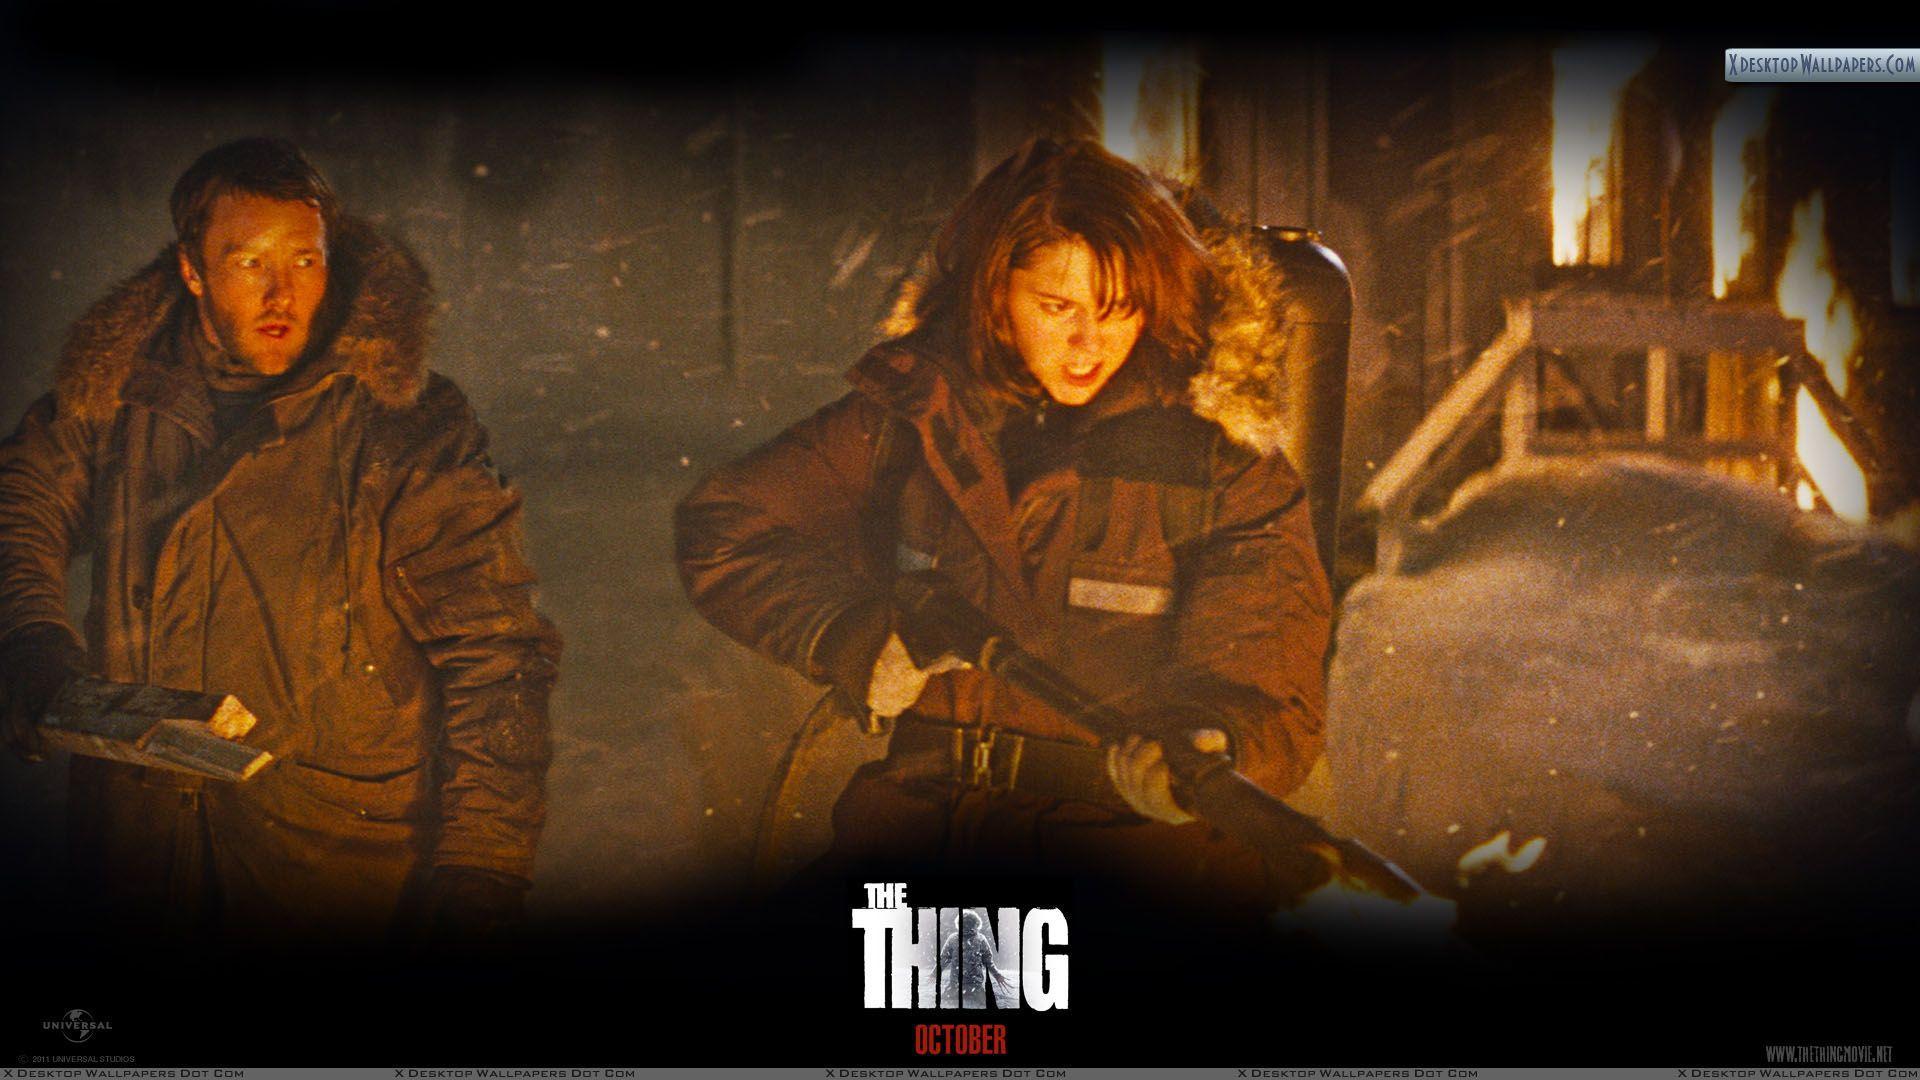 The Thing Wallpaper, Photo & Image in HD